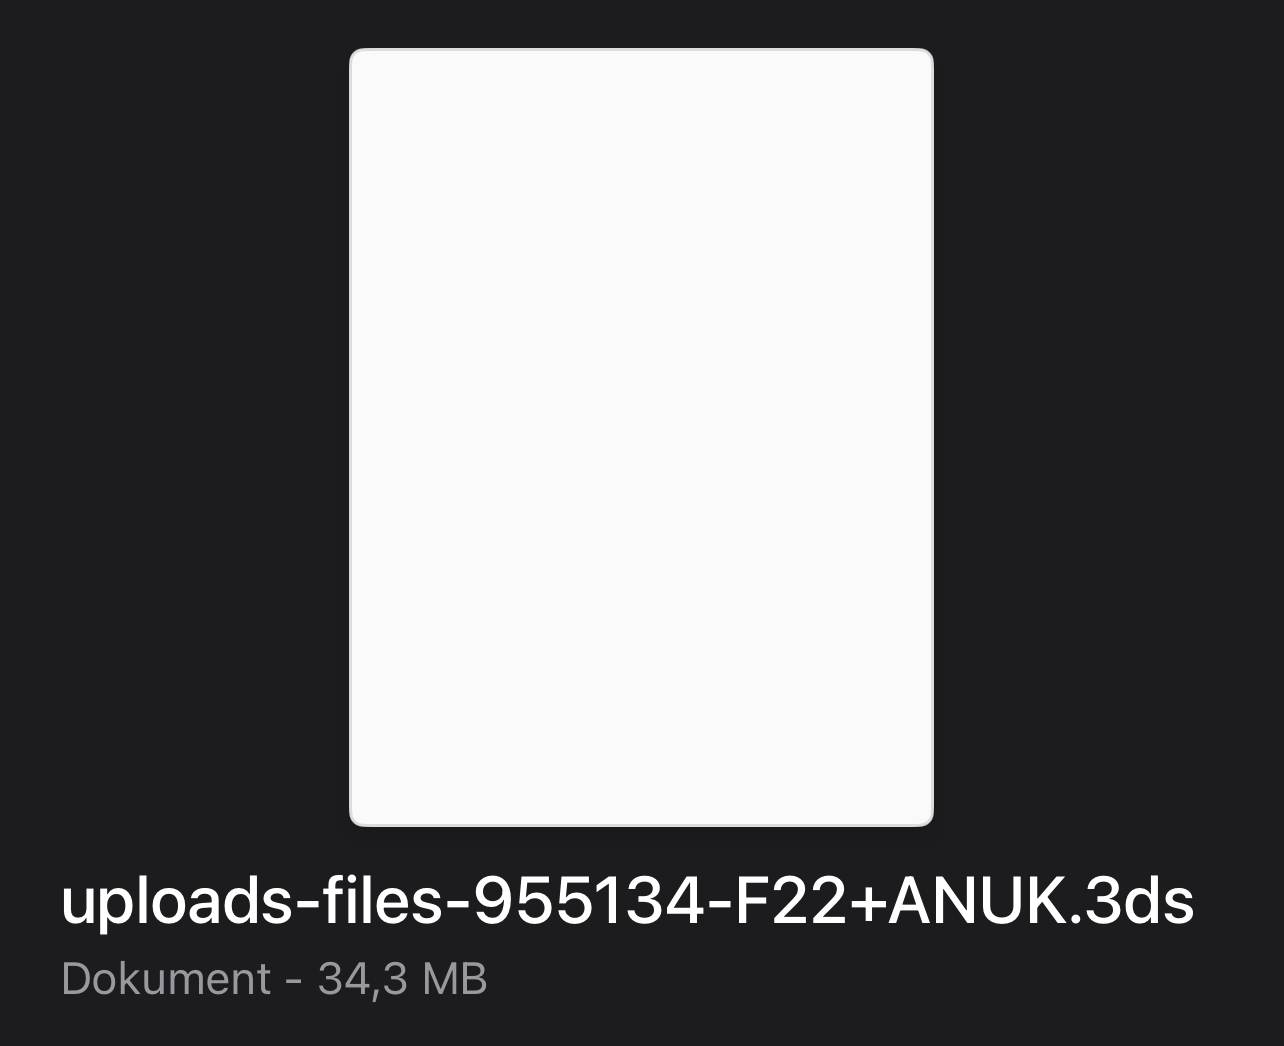 This is the file name